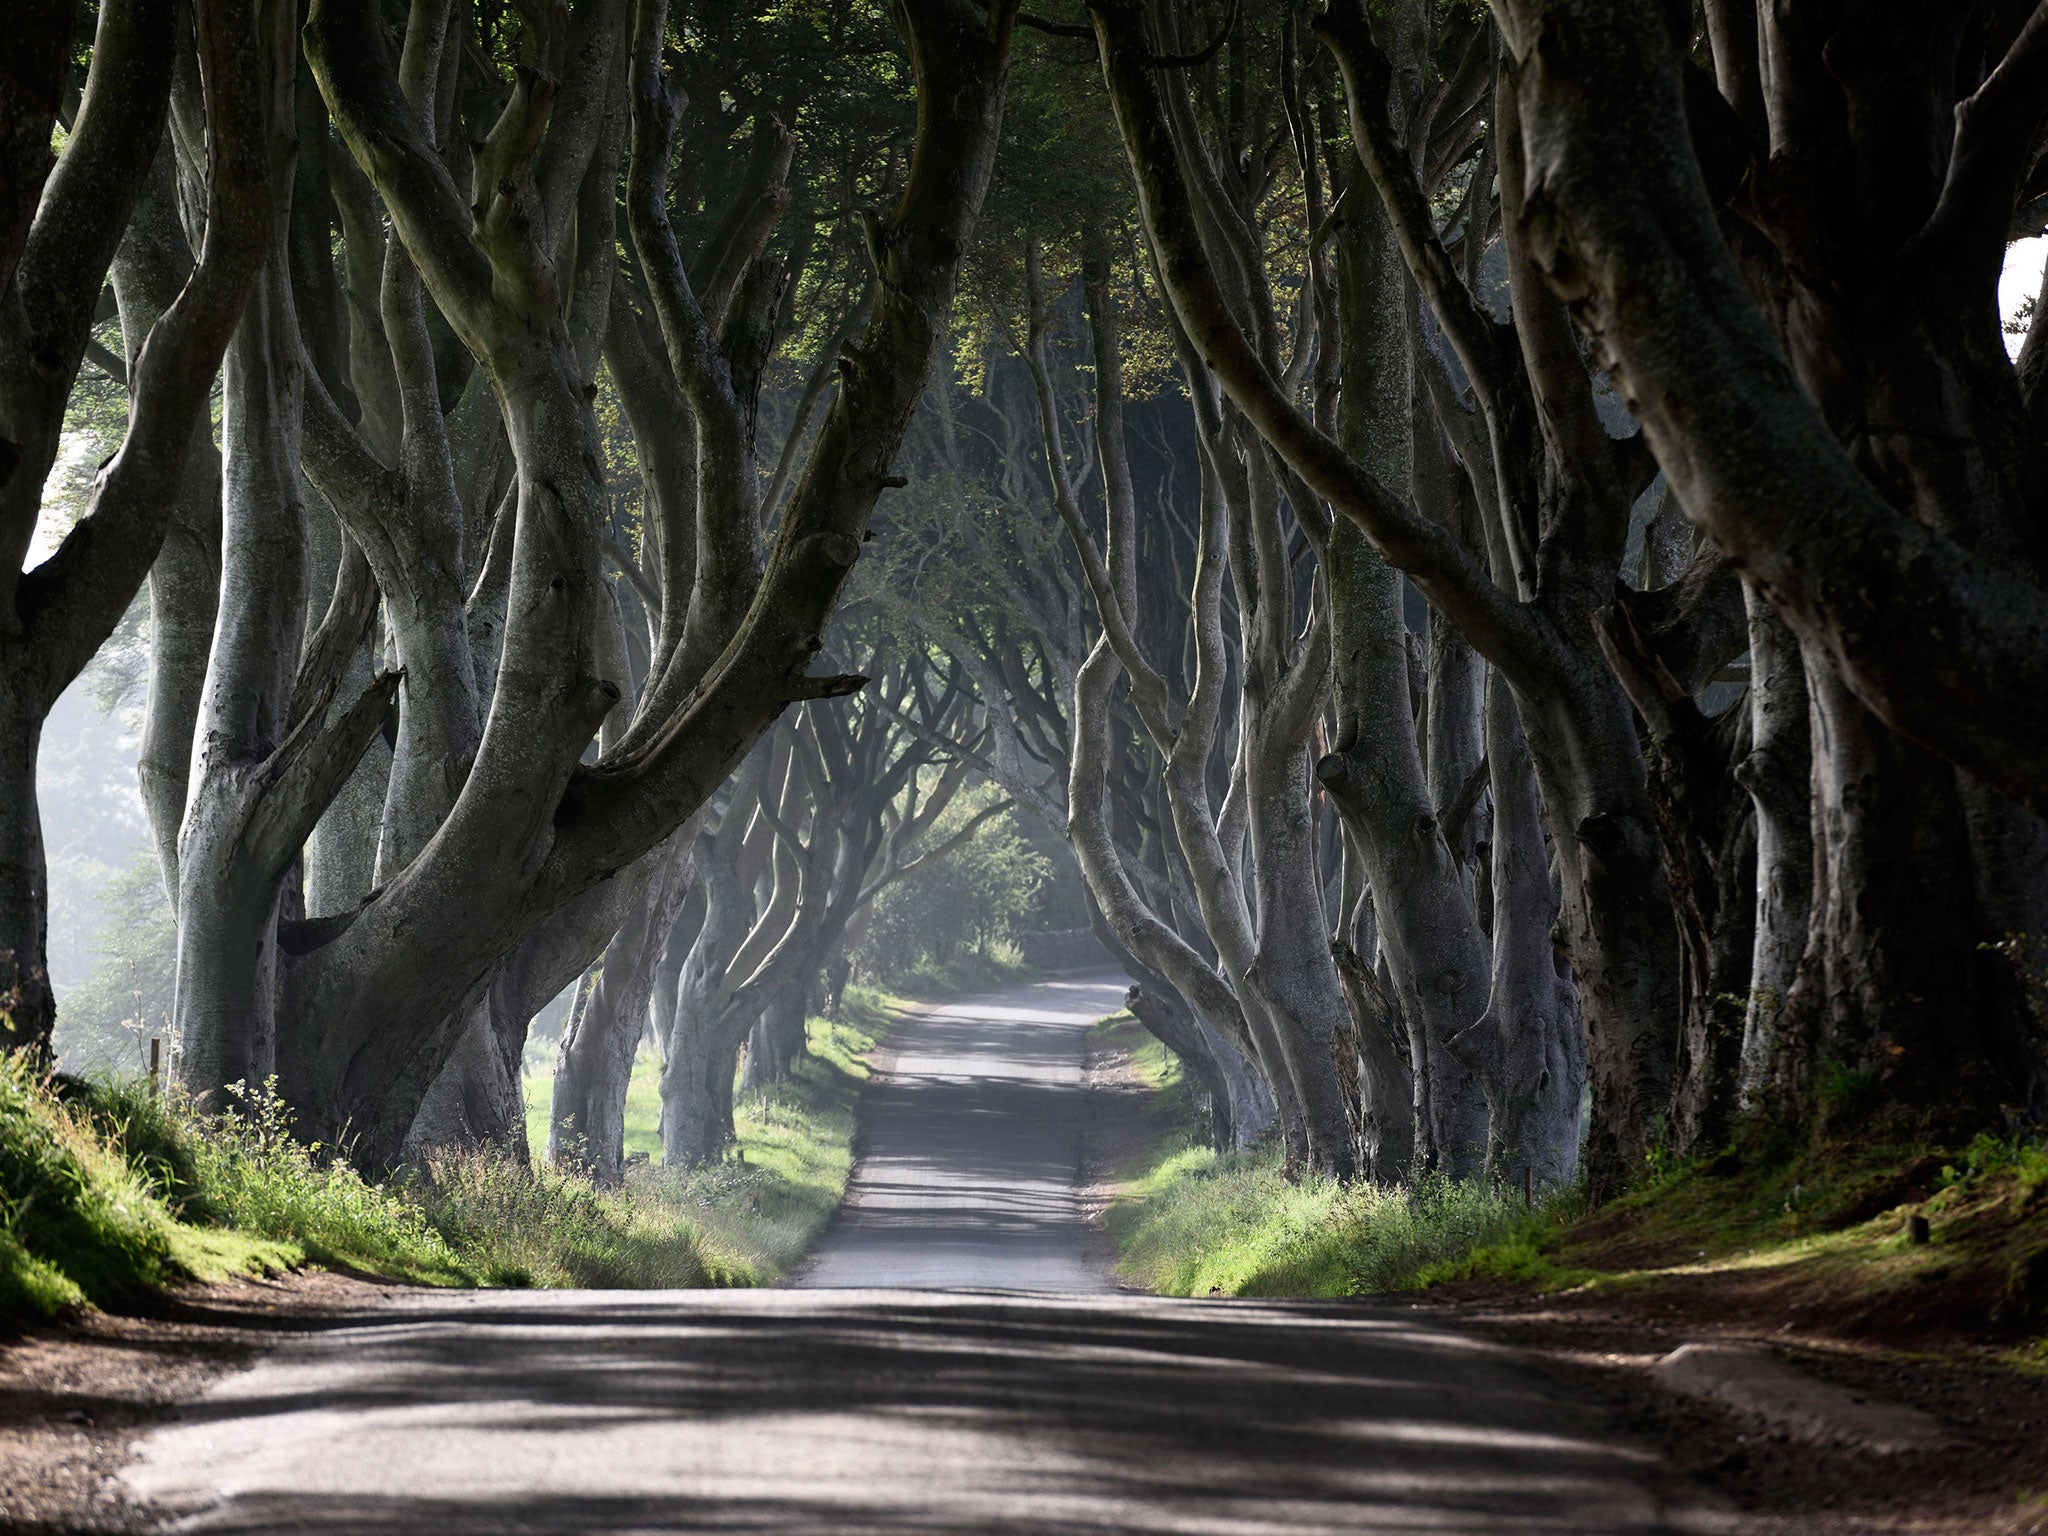 The Dark Hedges in Stranocum, Northern Ireland is a beech avenue which featured in ‘Game of Thrones’